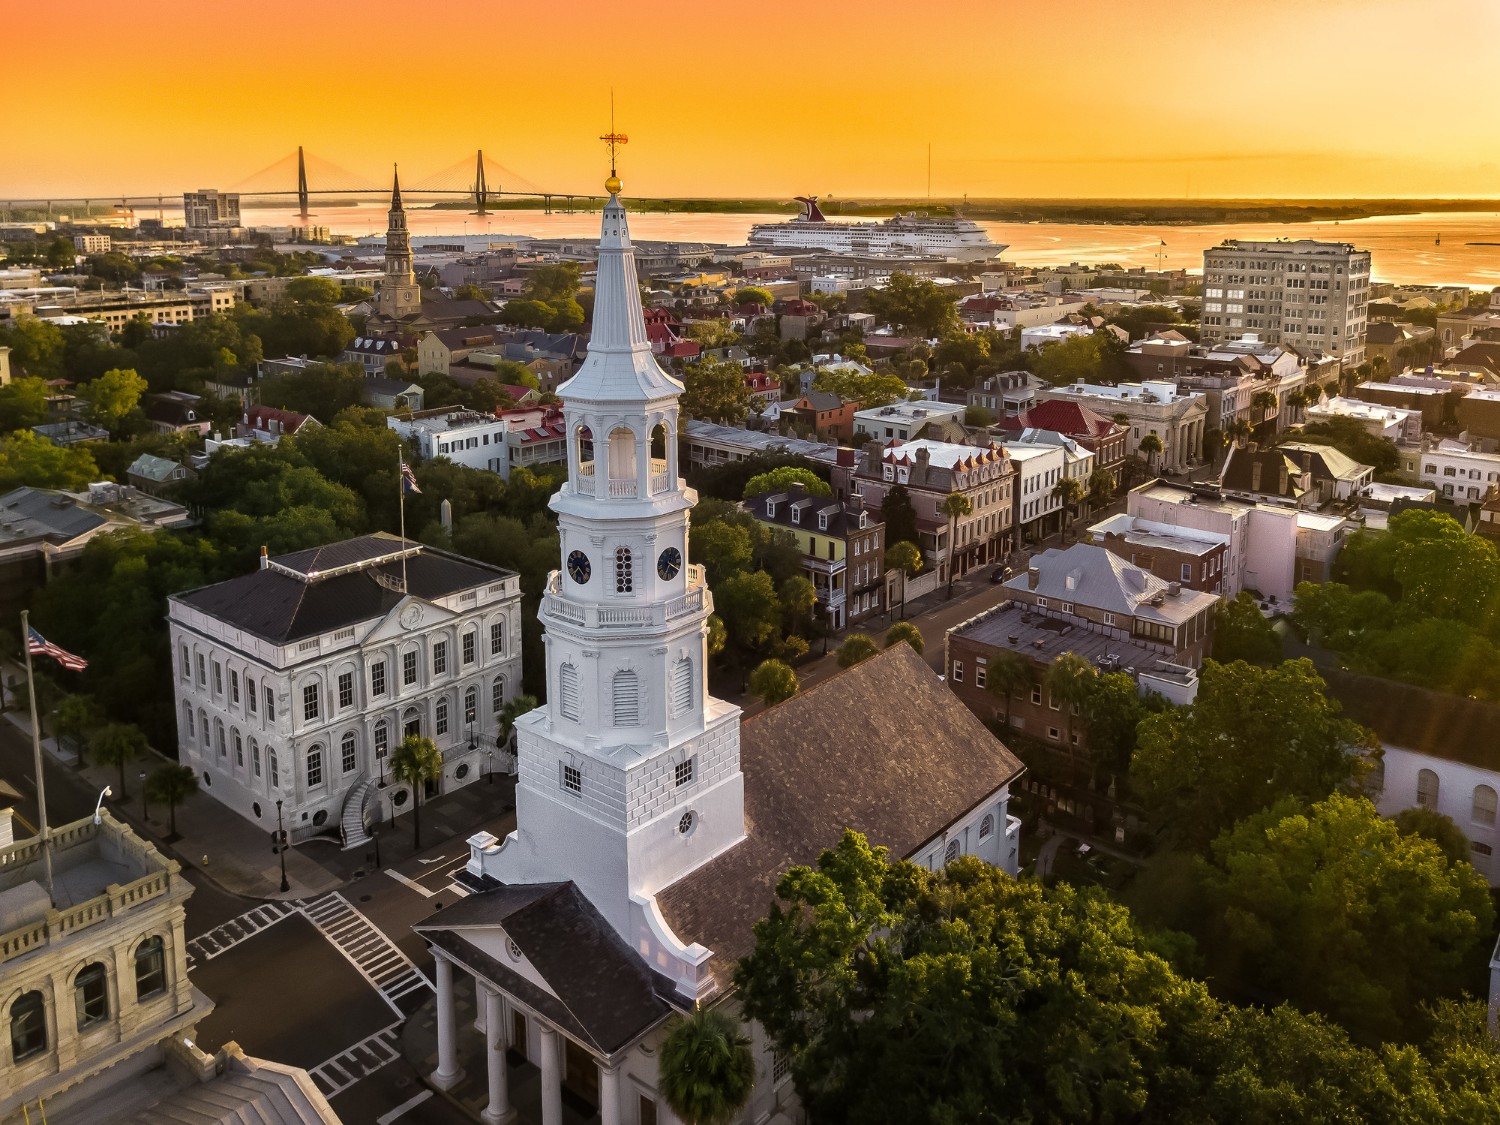 The Top 6 Historic Sites in Charleston, SC That You Need to Visit